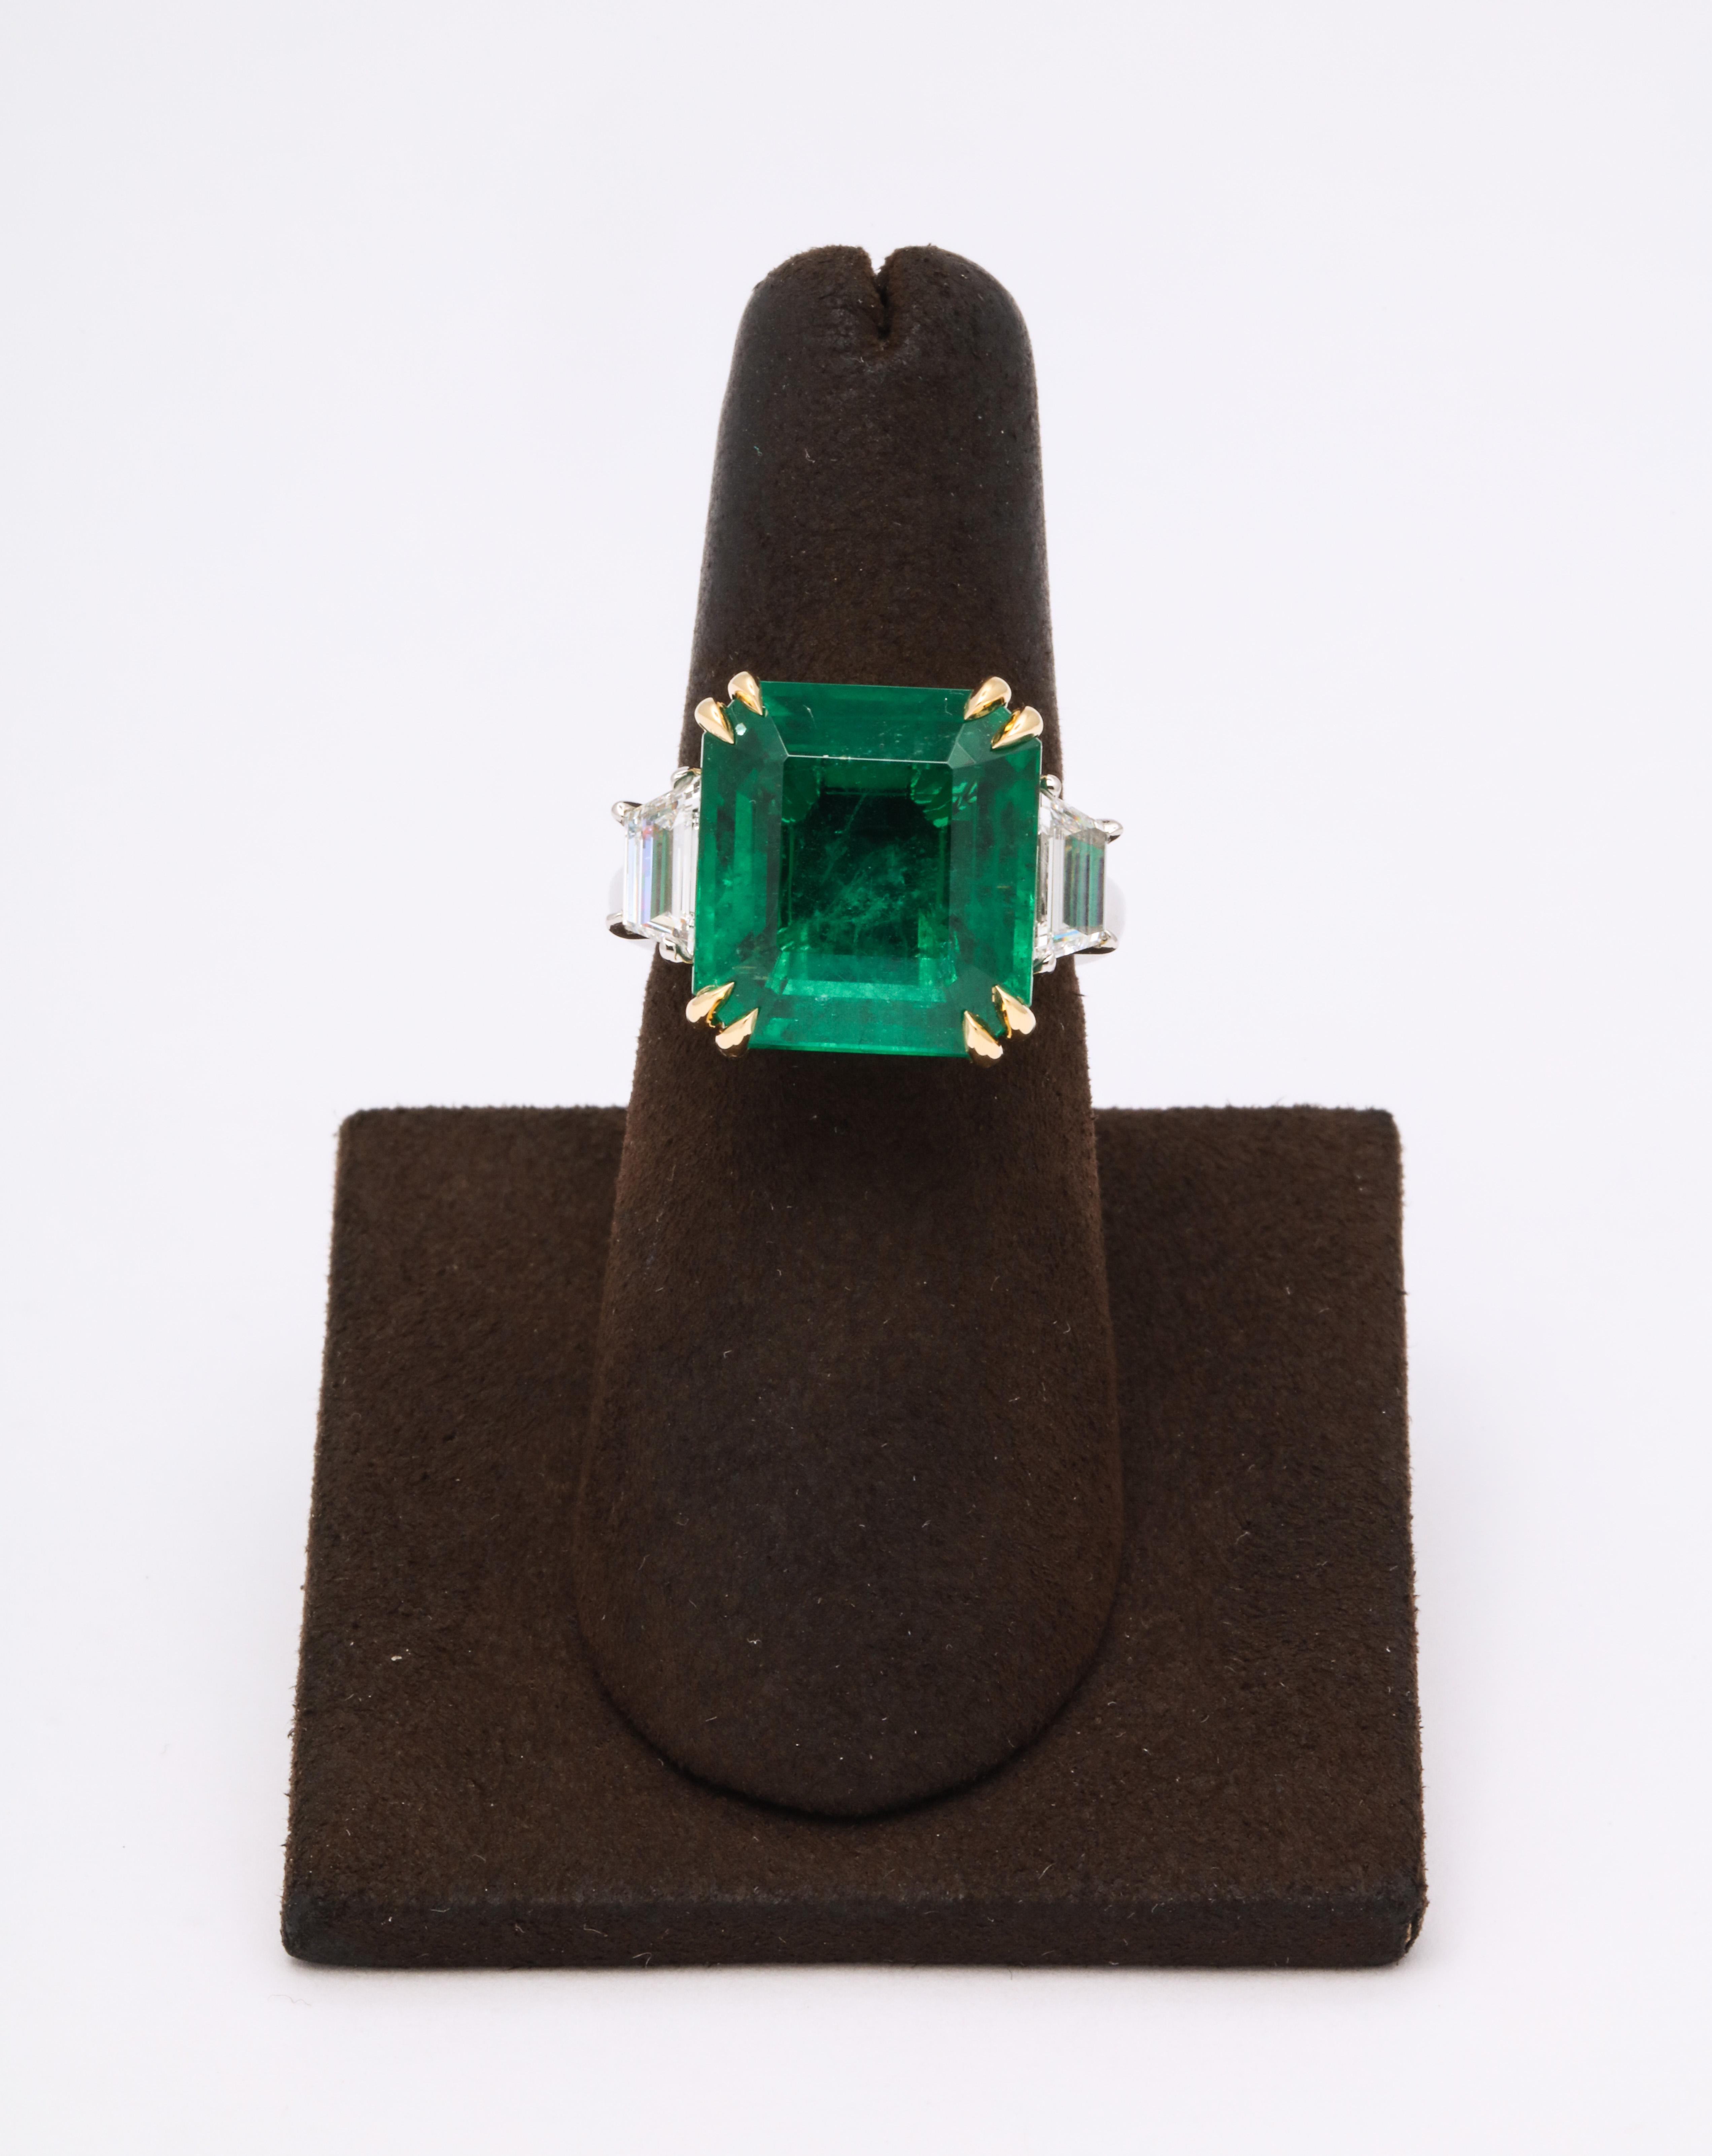 

A fine 10.73 carat VIVID GREEN Emerald set in a custom platinum and 18k yellow gold mounting with 1.16 carats of step cut trapezoid diamonds. 

The center emerald measures 14.60 mm x 13.40 mm -- it is certified by Christian Dunaigre of